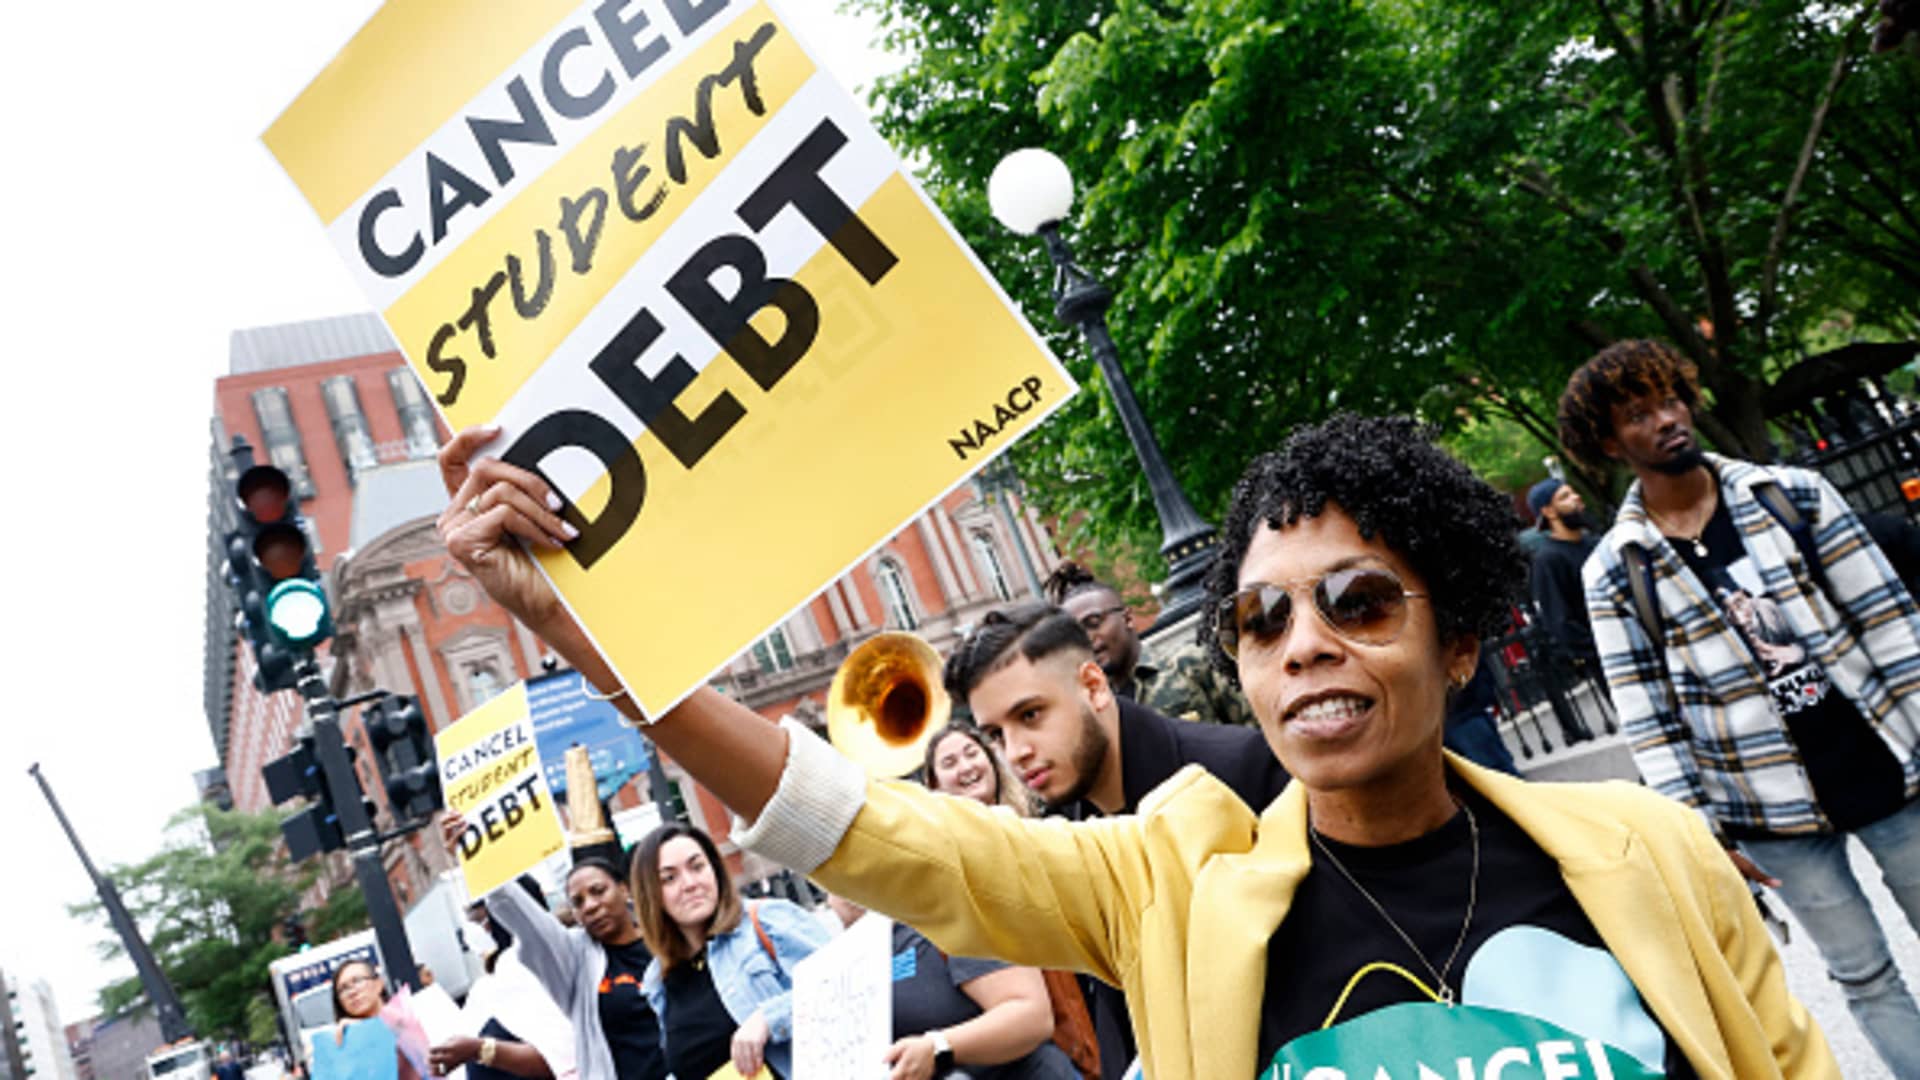 Here’s why some economists are concerned student loans may cause the next big bubble